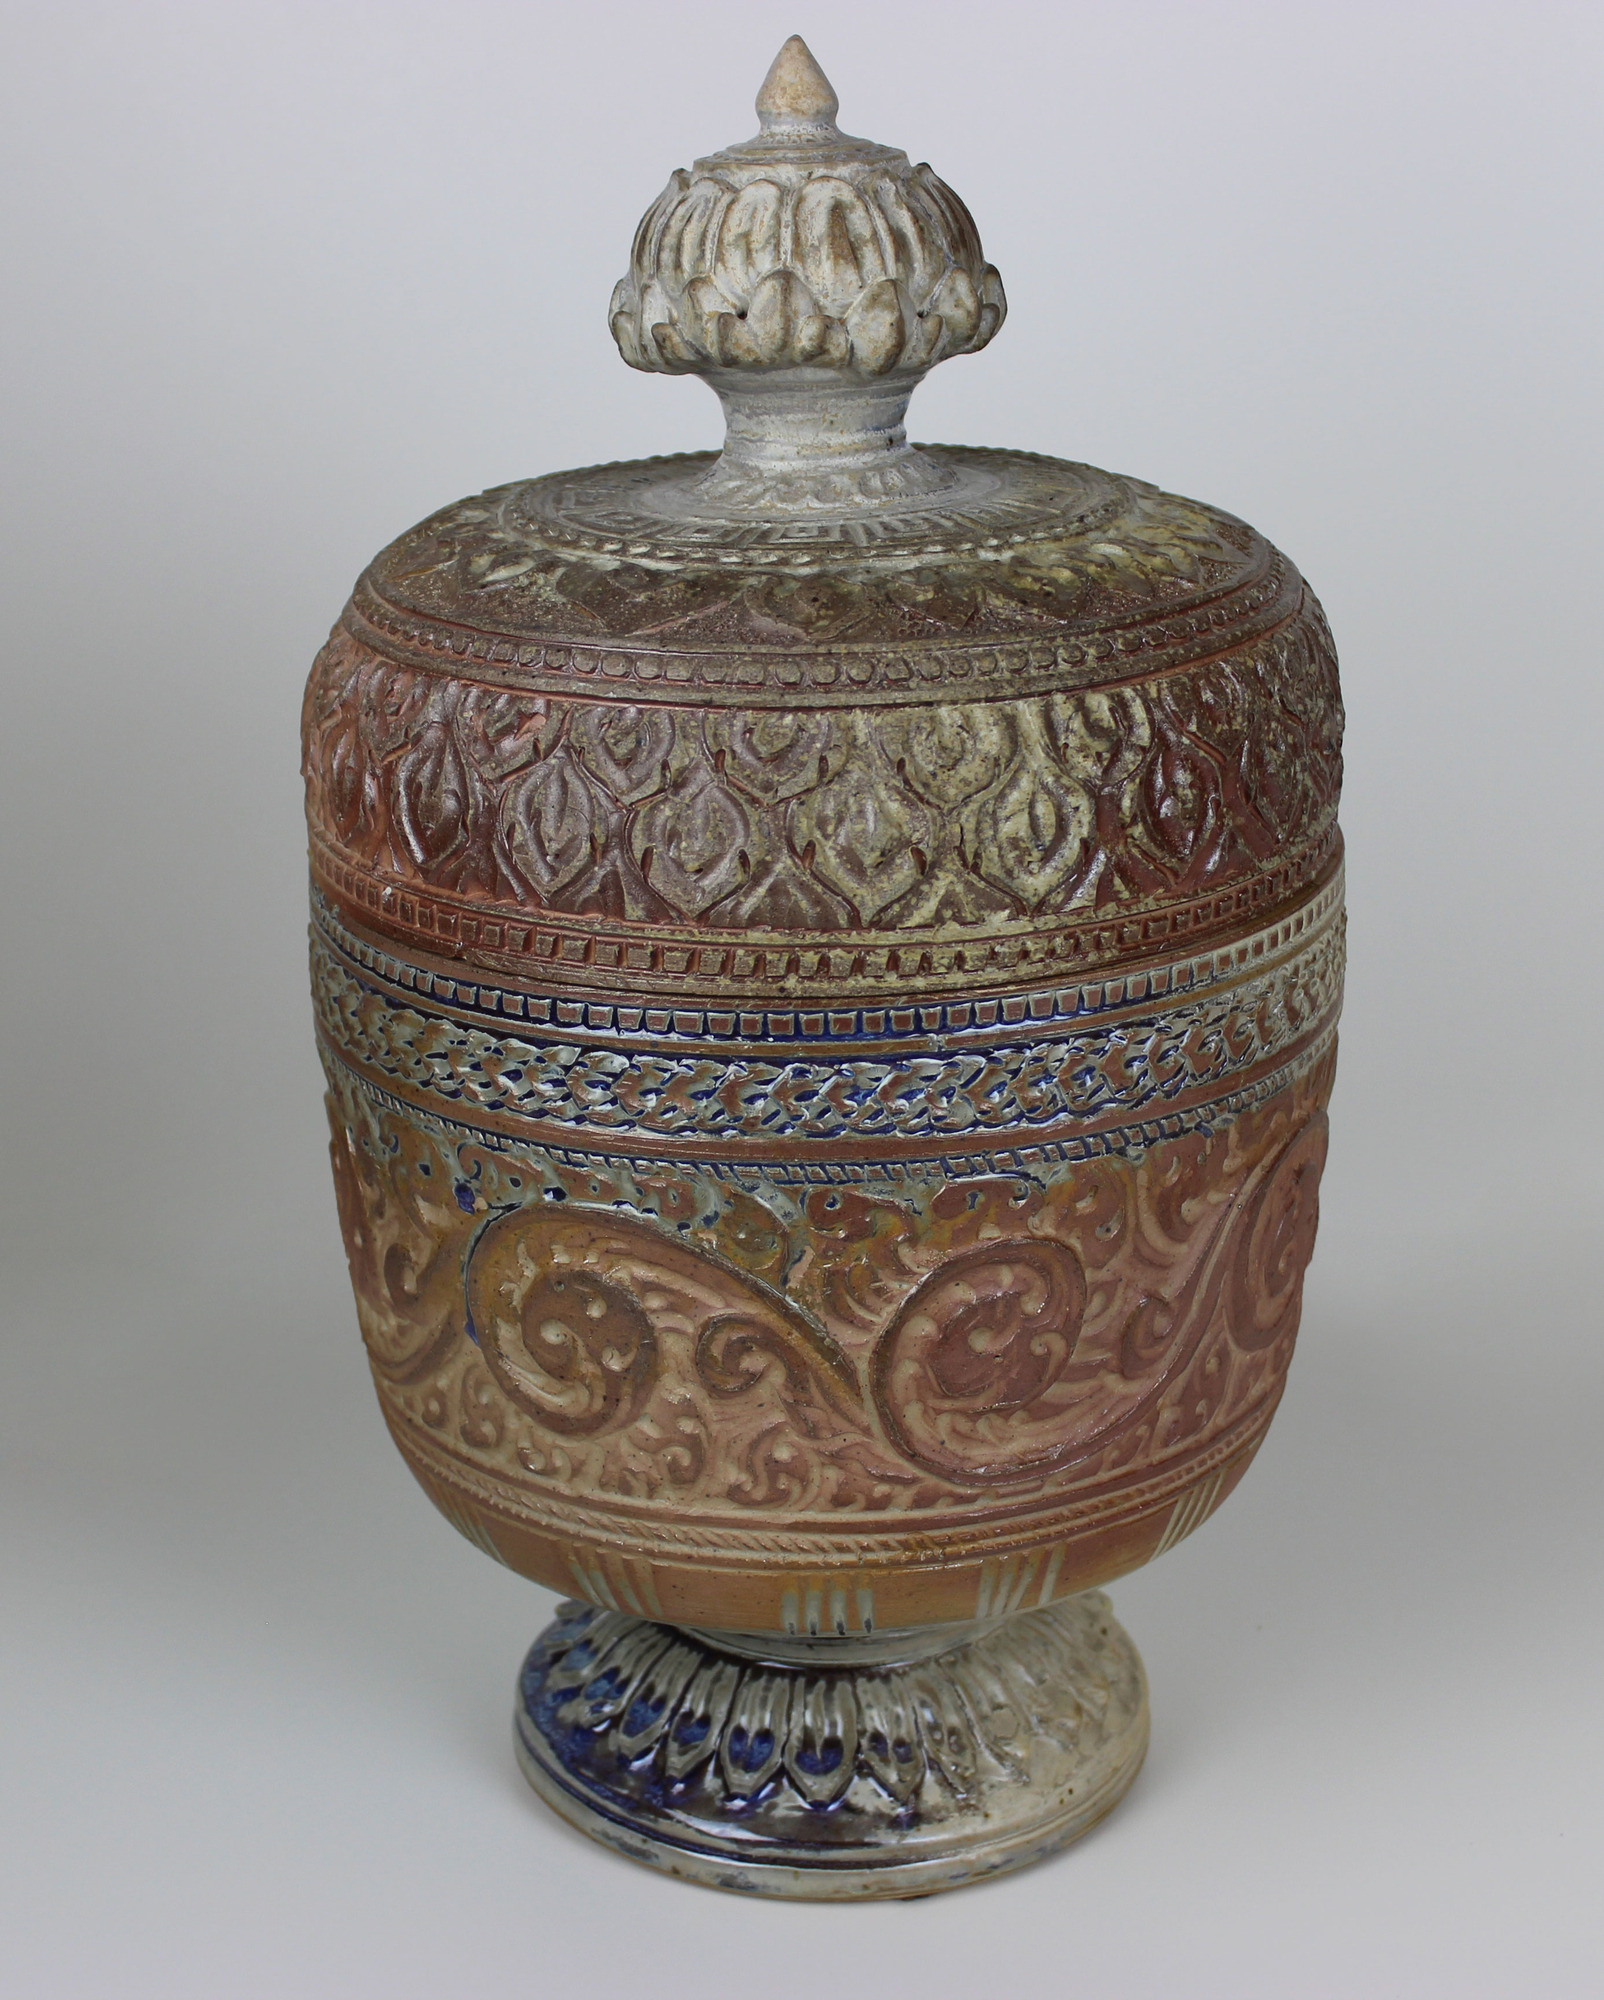 The jar has a rounded foot and low waist, with an ovoid body. The main motif on the jar are foliate swirls. Above this, there is a rope-like band, then a bead-like band. Then a pattern of boomerang-like shapes. 